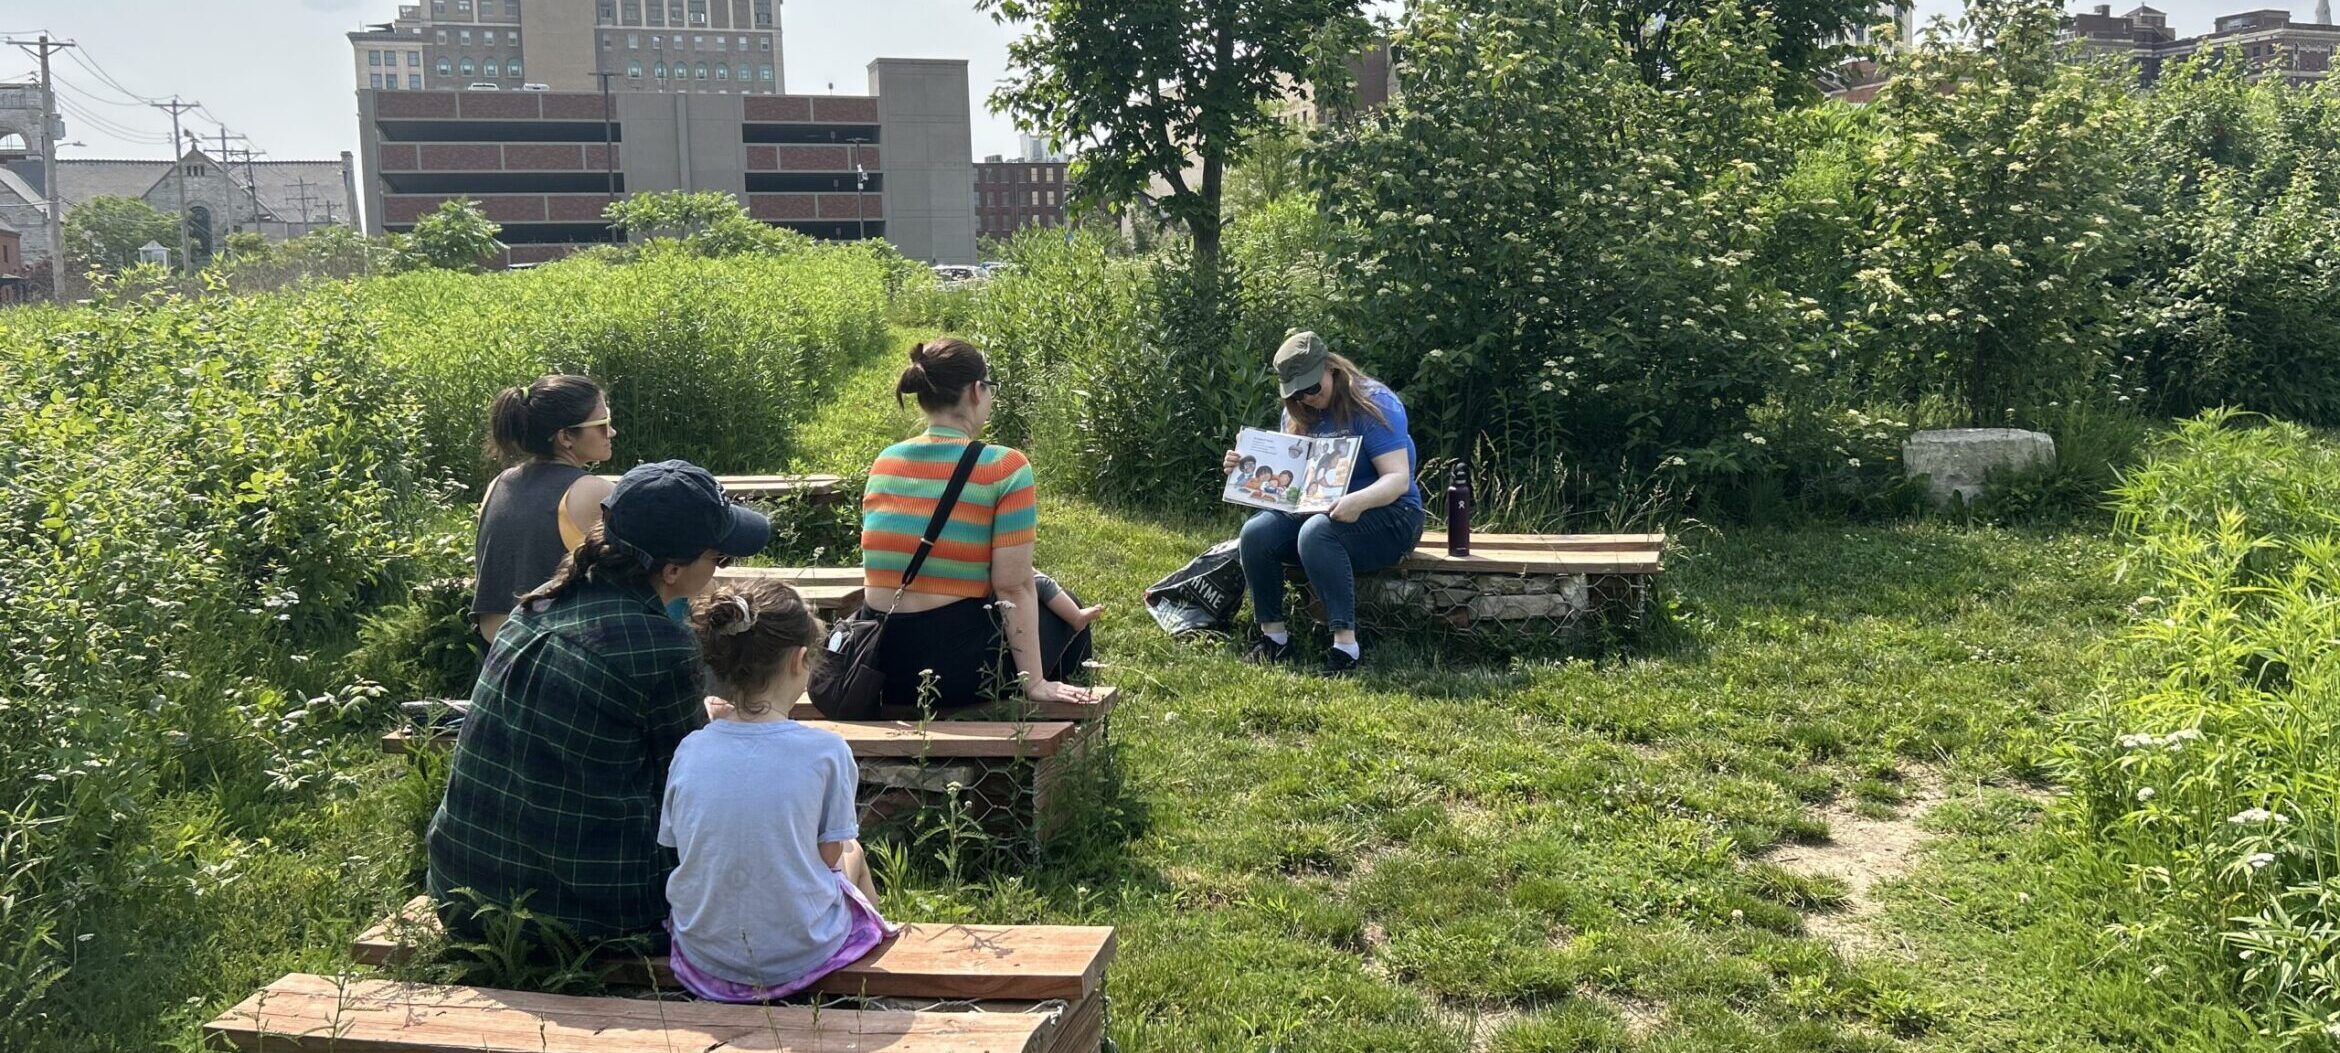 Children and parents attending Storytime in Park-Like